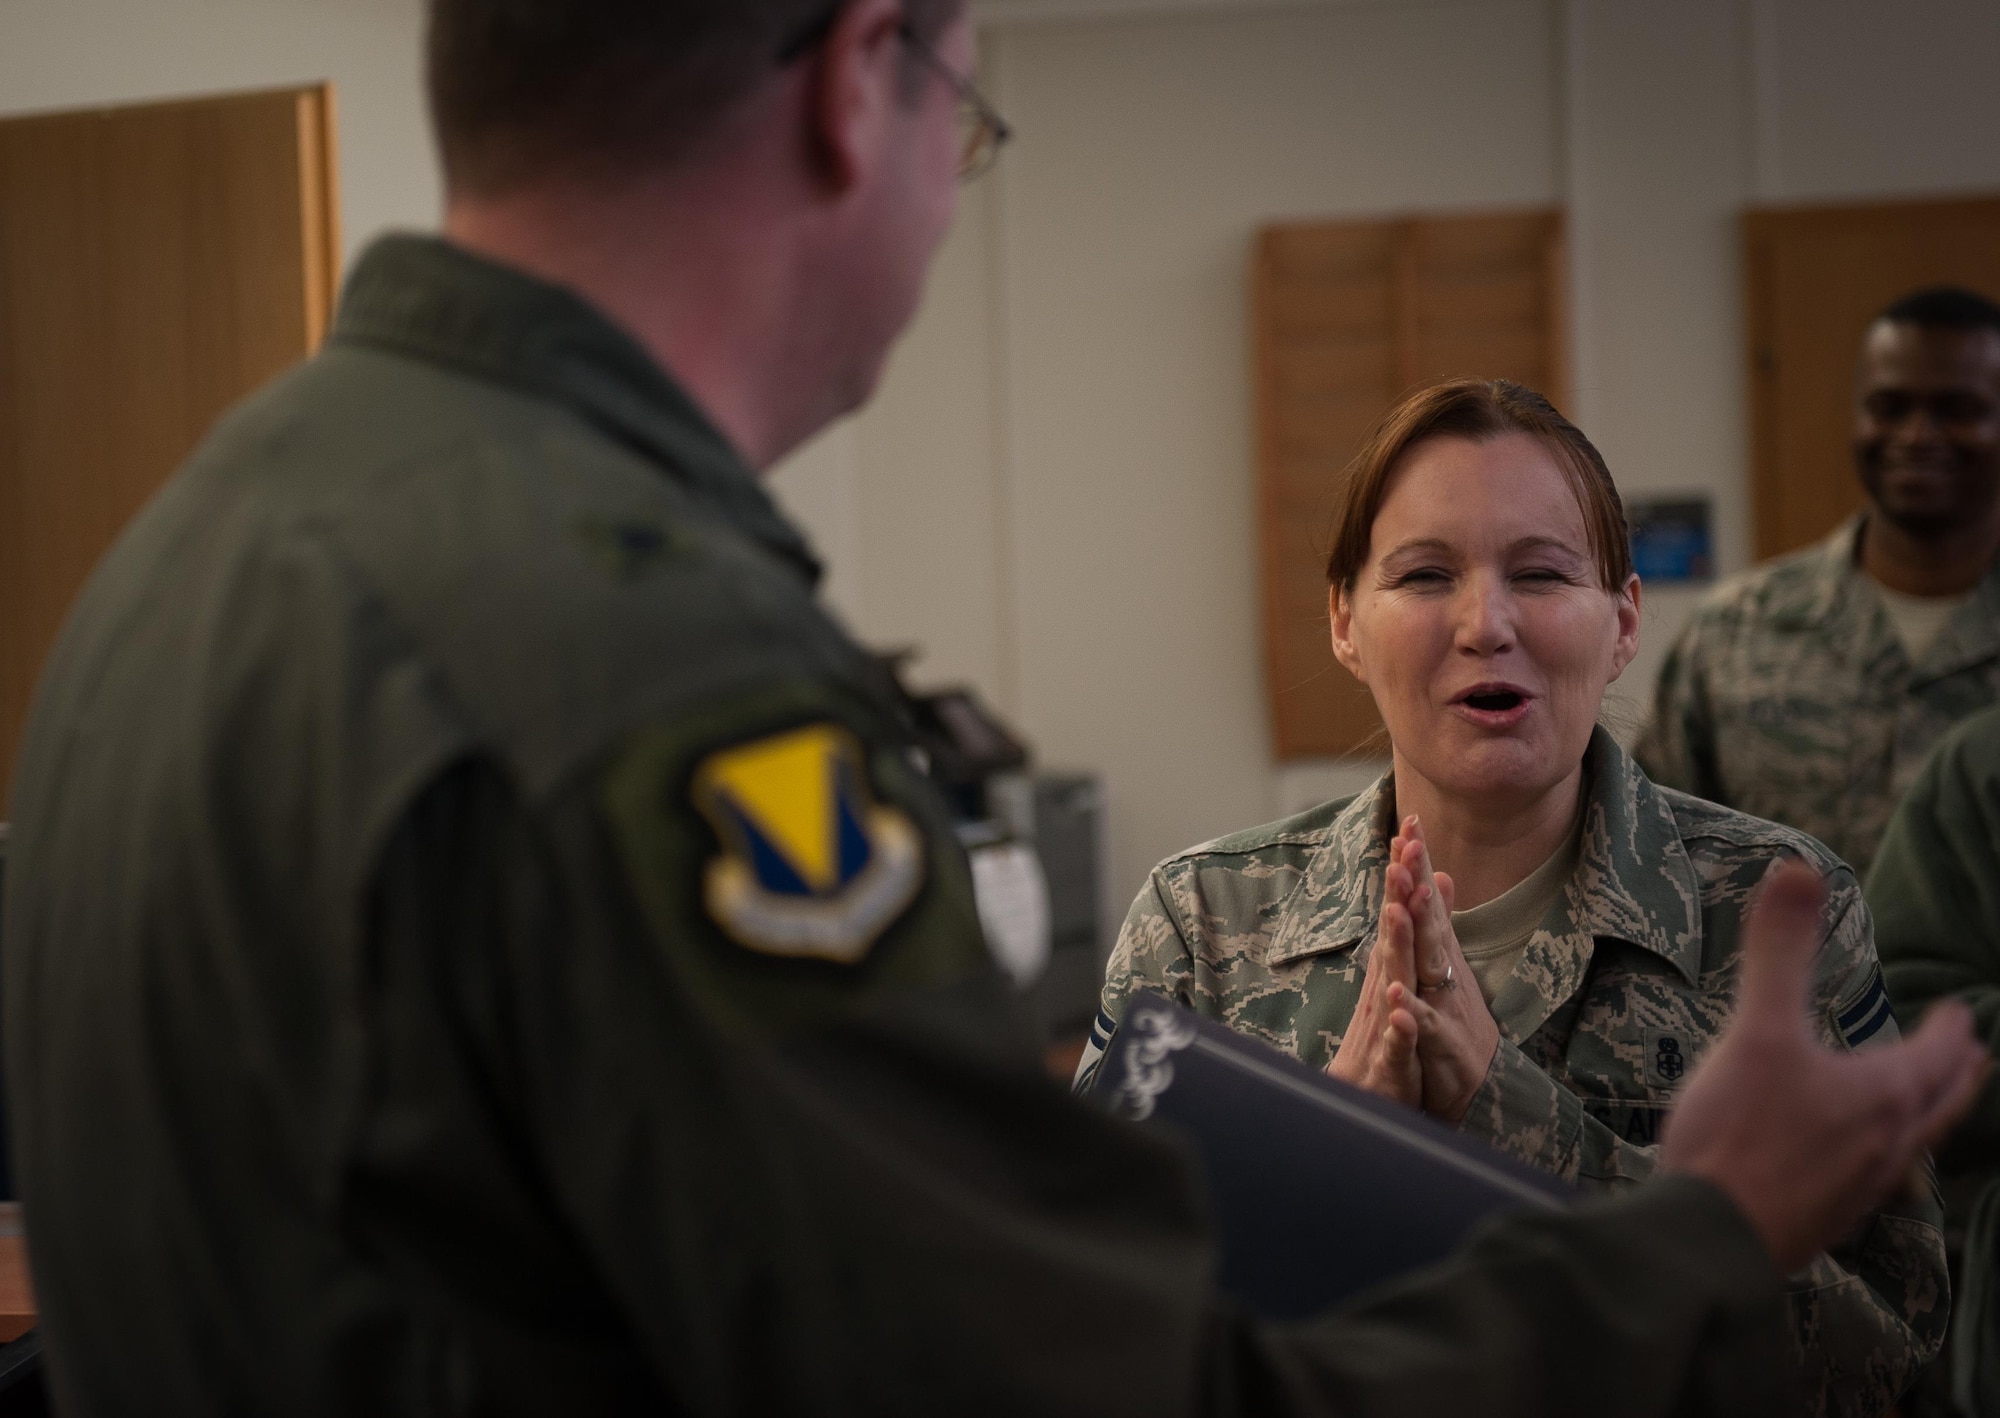 Senior Master Sgt. Susan Hale, 86th Medical Squadron command support section operations superintendent, reacts ecstatically after being notified of her promotion to chief master sergeant at Landstuhl Regional Medical Facility, Germany, Dec. 8, 2016. By congressional mandate, one percent of the Air Force enlisted corps may hold the rank of chief master sergeant. (U.S. Air Force photo by Airman 1st Class Lane T. Plummer)